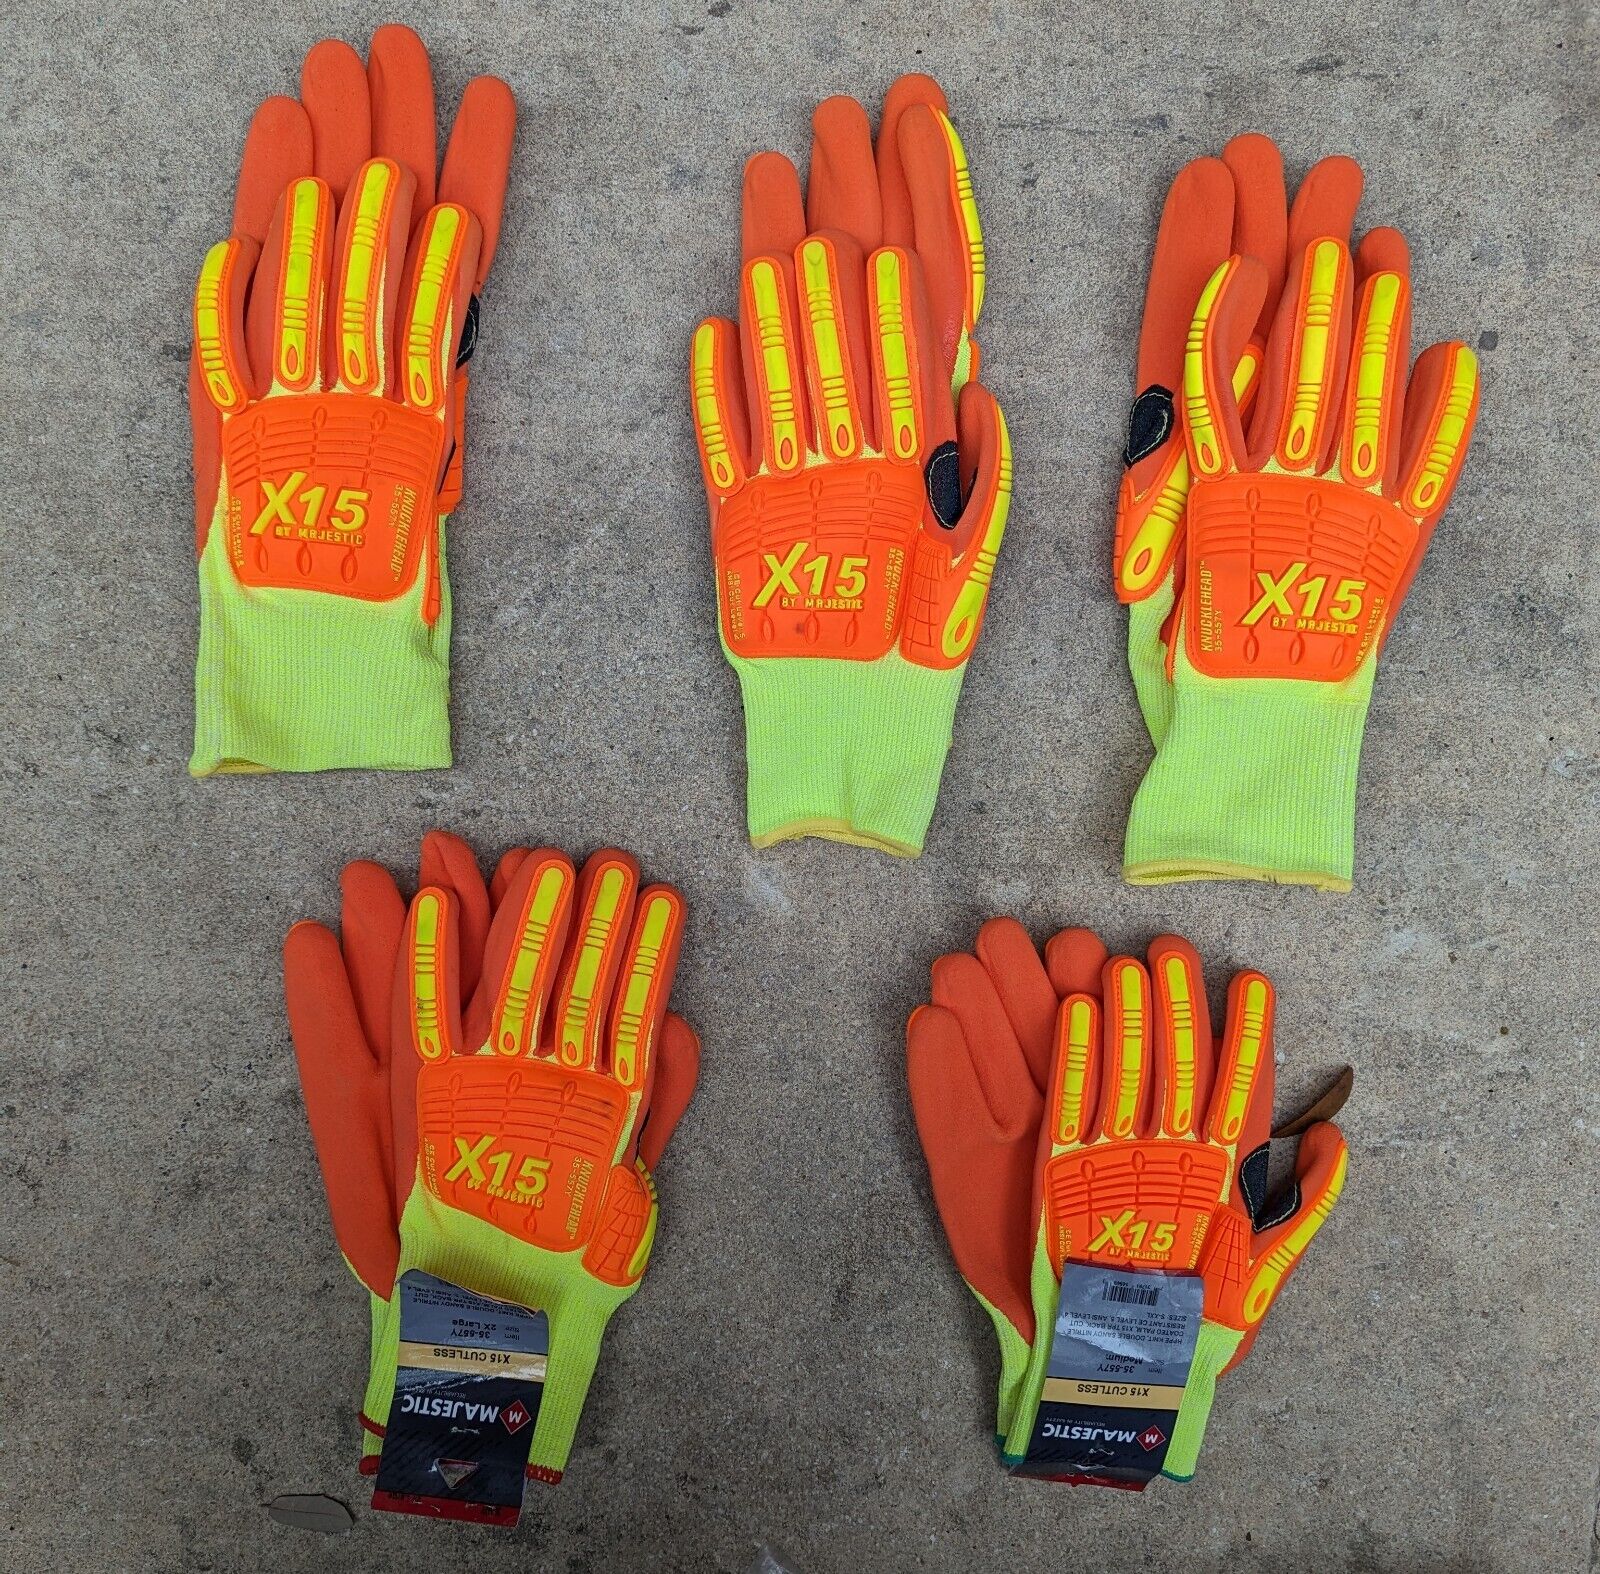 5 PAIR Majestic X15 Knucklehead Cut Res. Level 5 Gloves 35-557Y, 1-2x, 1-M, 3-L.